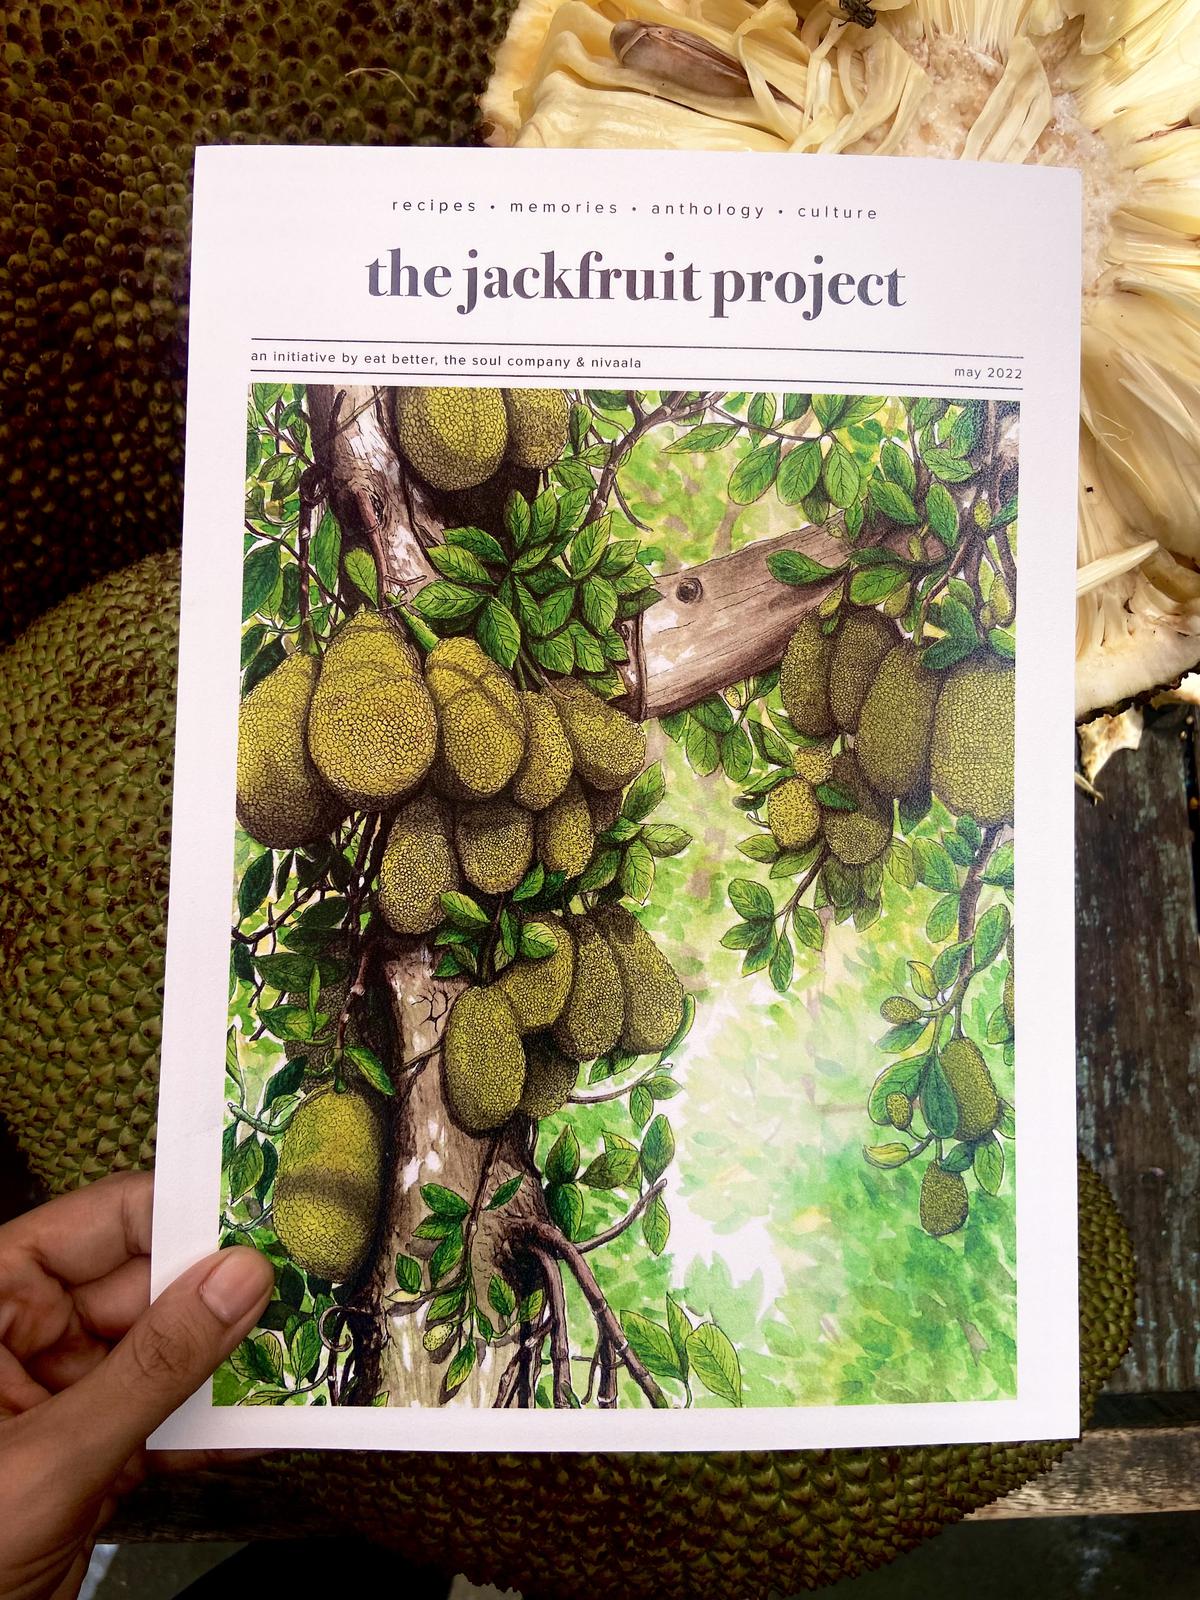 A snapshot of the jackfruit zine illustrated by Sean D'Souza